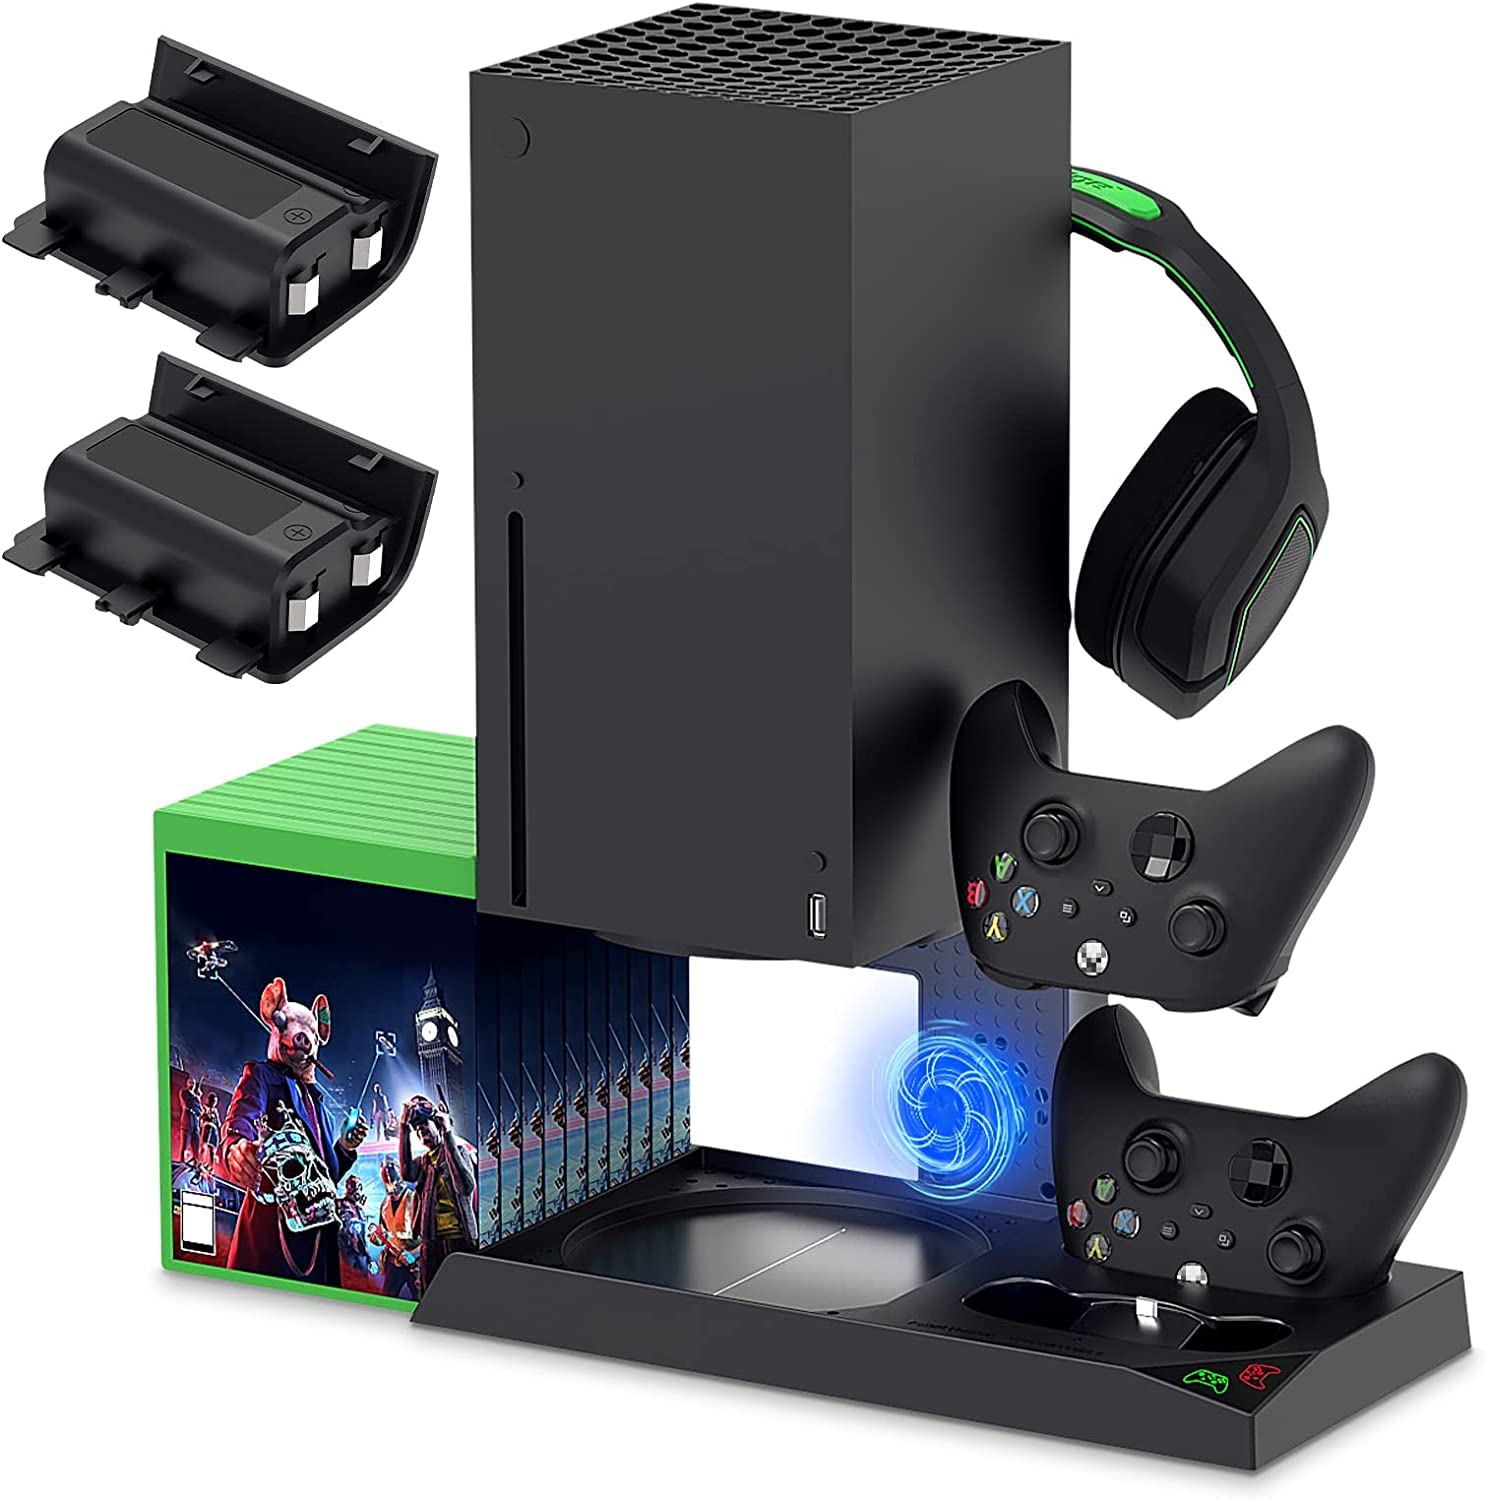 New World For Xbox series X cooling stand ,for xbox series X controller charging stand with 1400mAh Rechargeable Battery Pack with 10 Game Storage Organizer & Headphone Holder